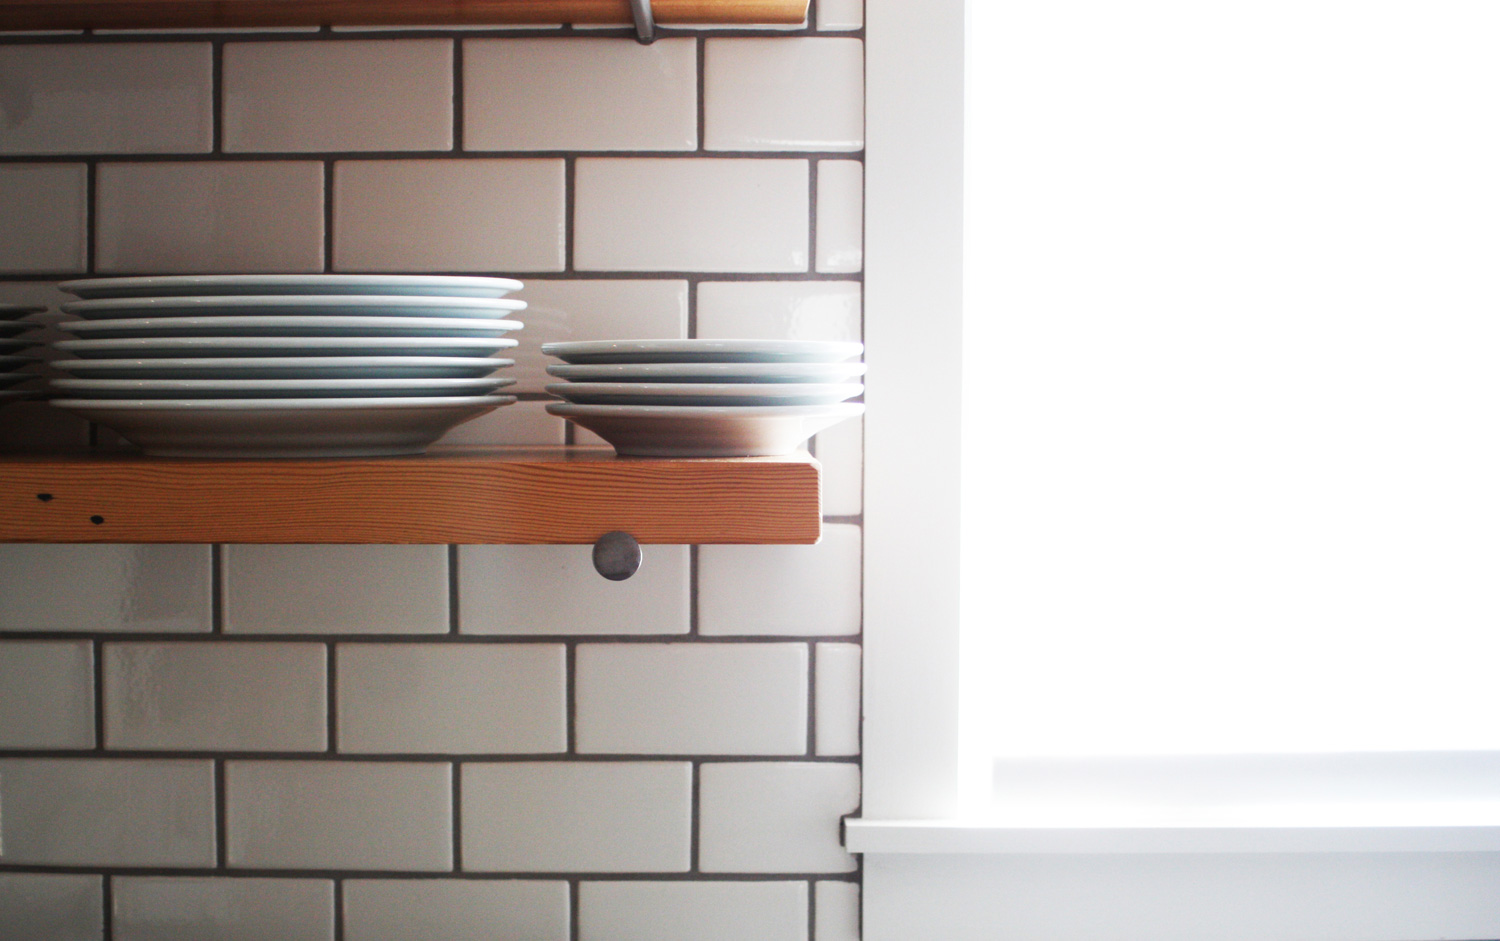 Subway Tile and Shelf in Bungalow Kitchen Remodel | Hammer & Hand